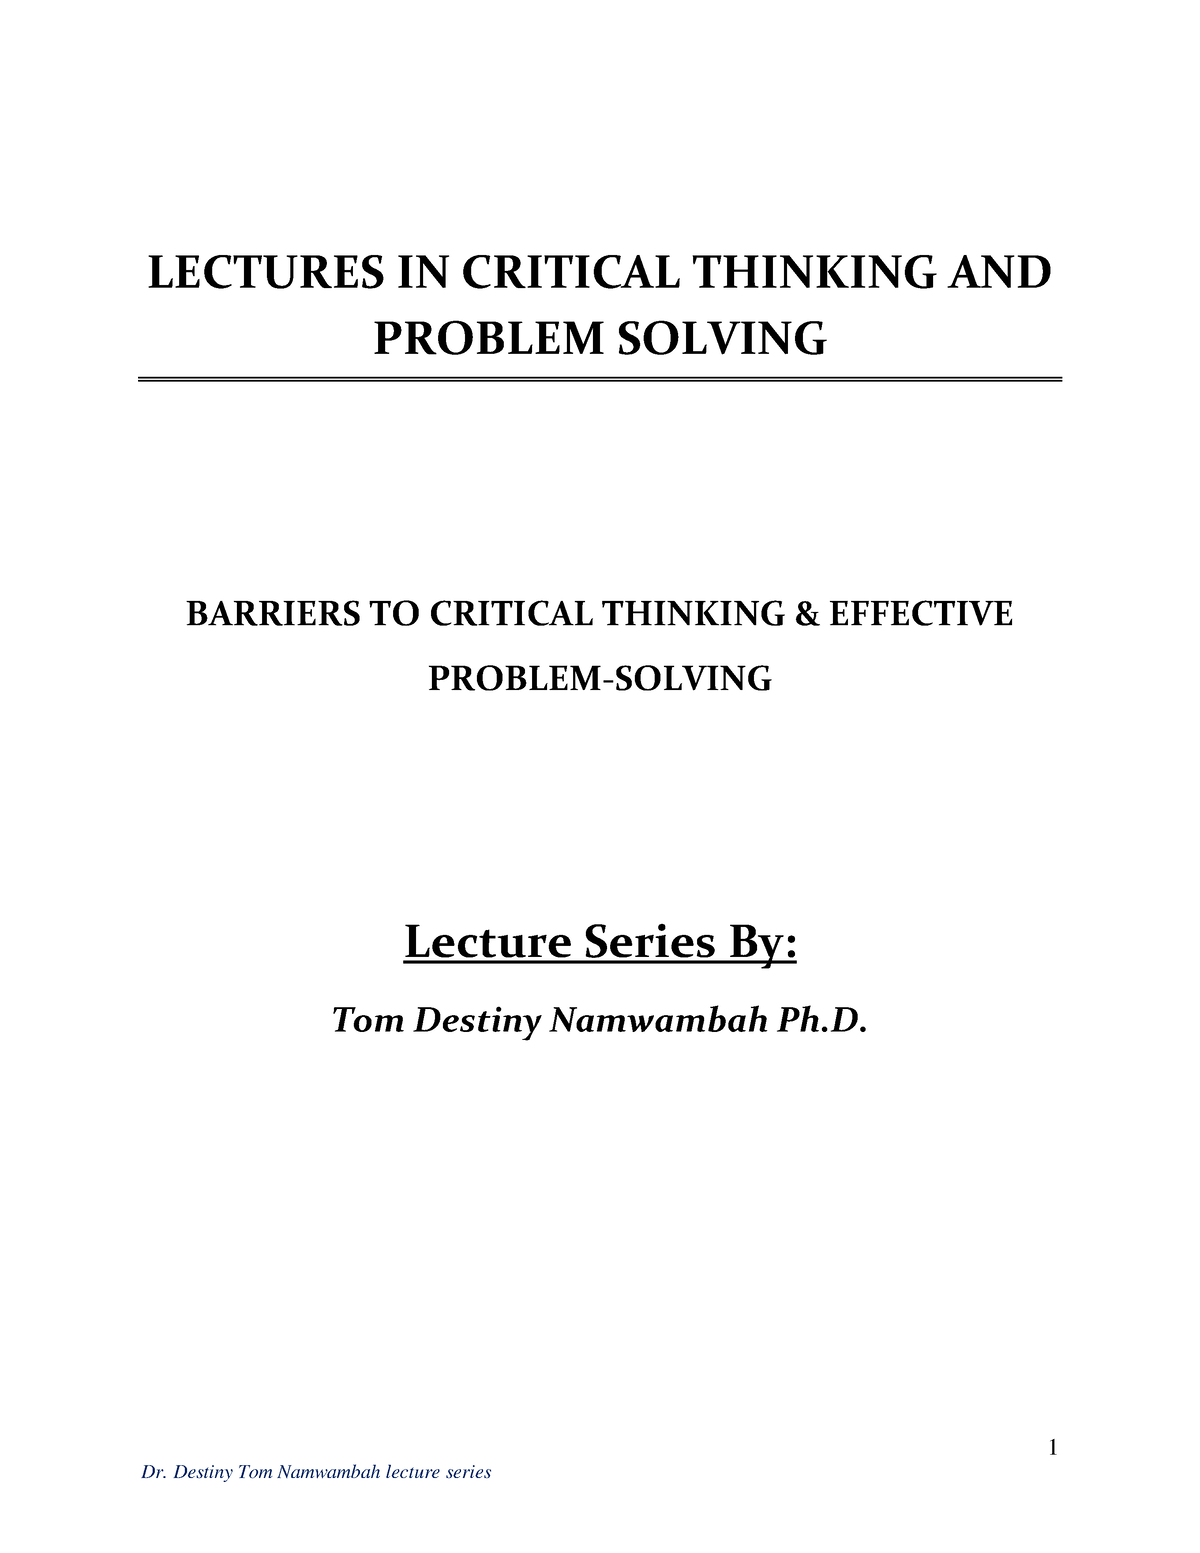 barriers to problem solving pdf